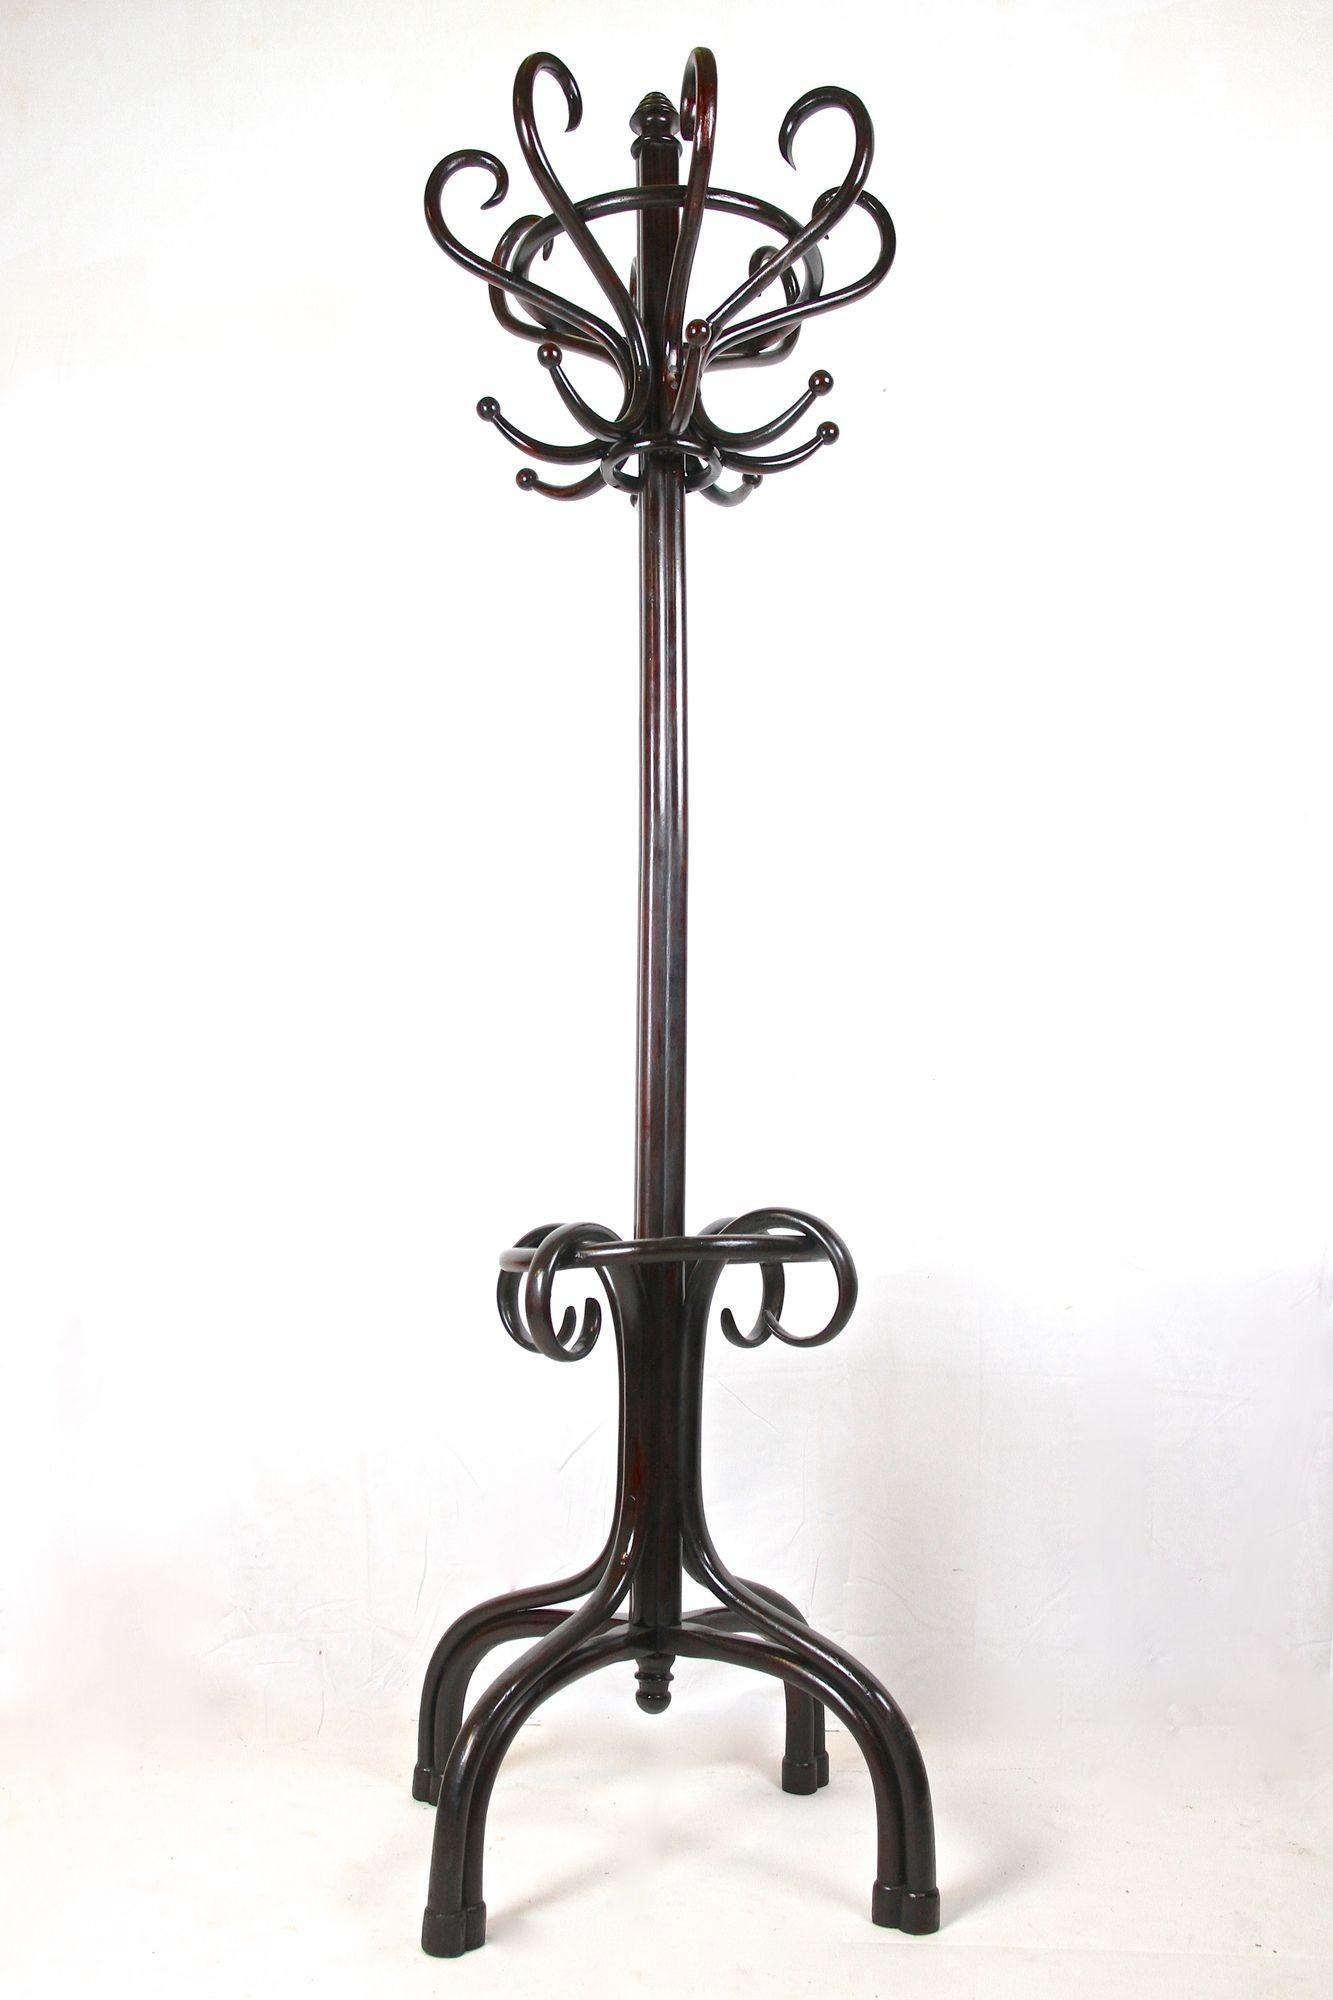 Thonet Coat Rack/ Wardrobe Stand Bentwood Polished, Art Nouveau, AT ca. 1905 For Sale 12